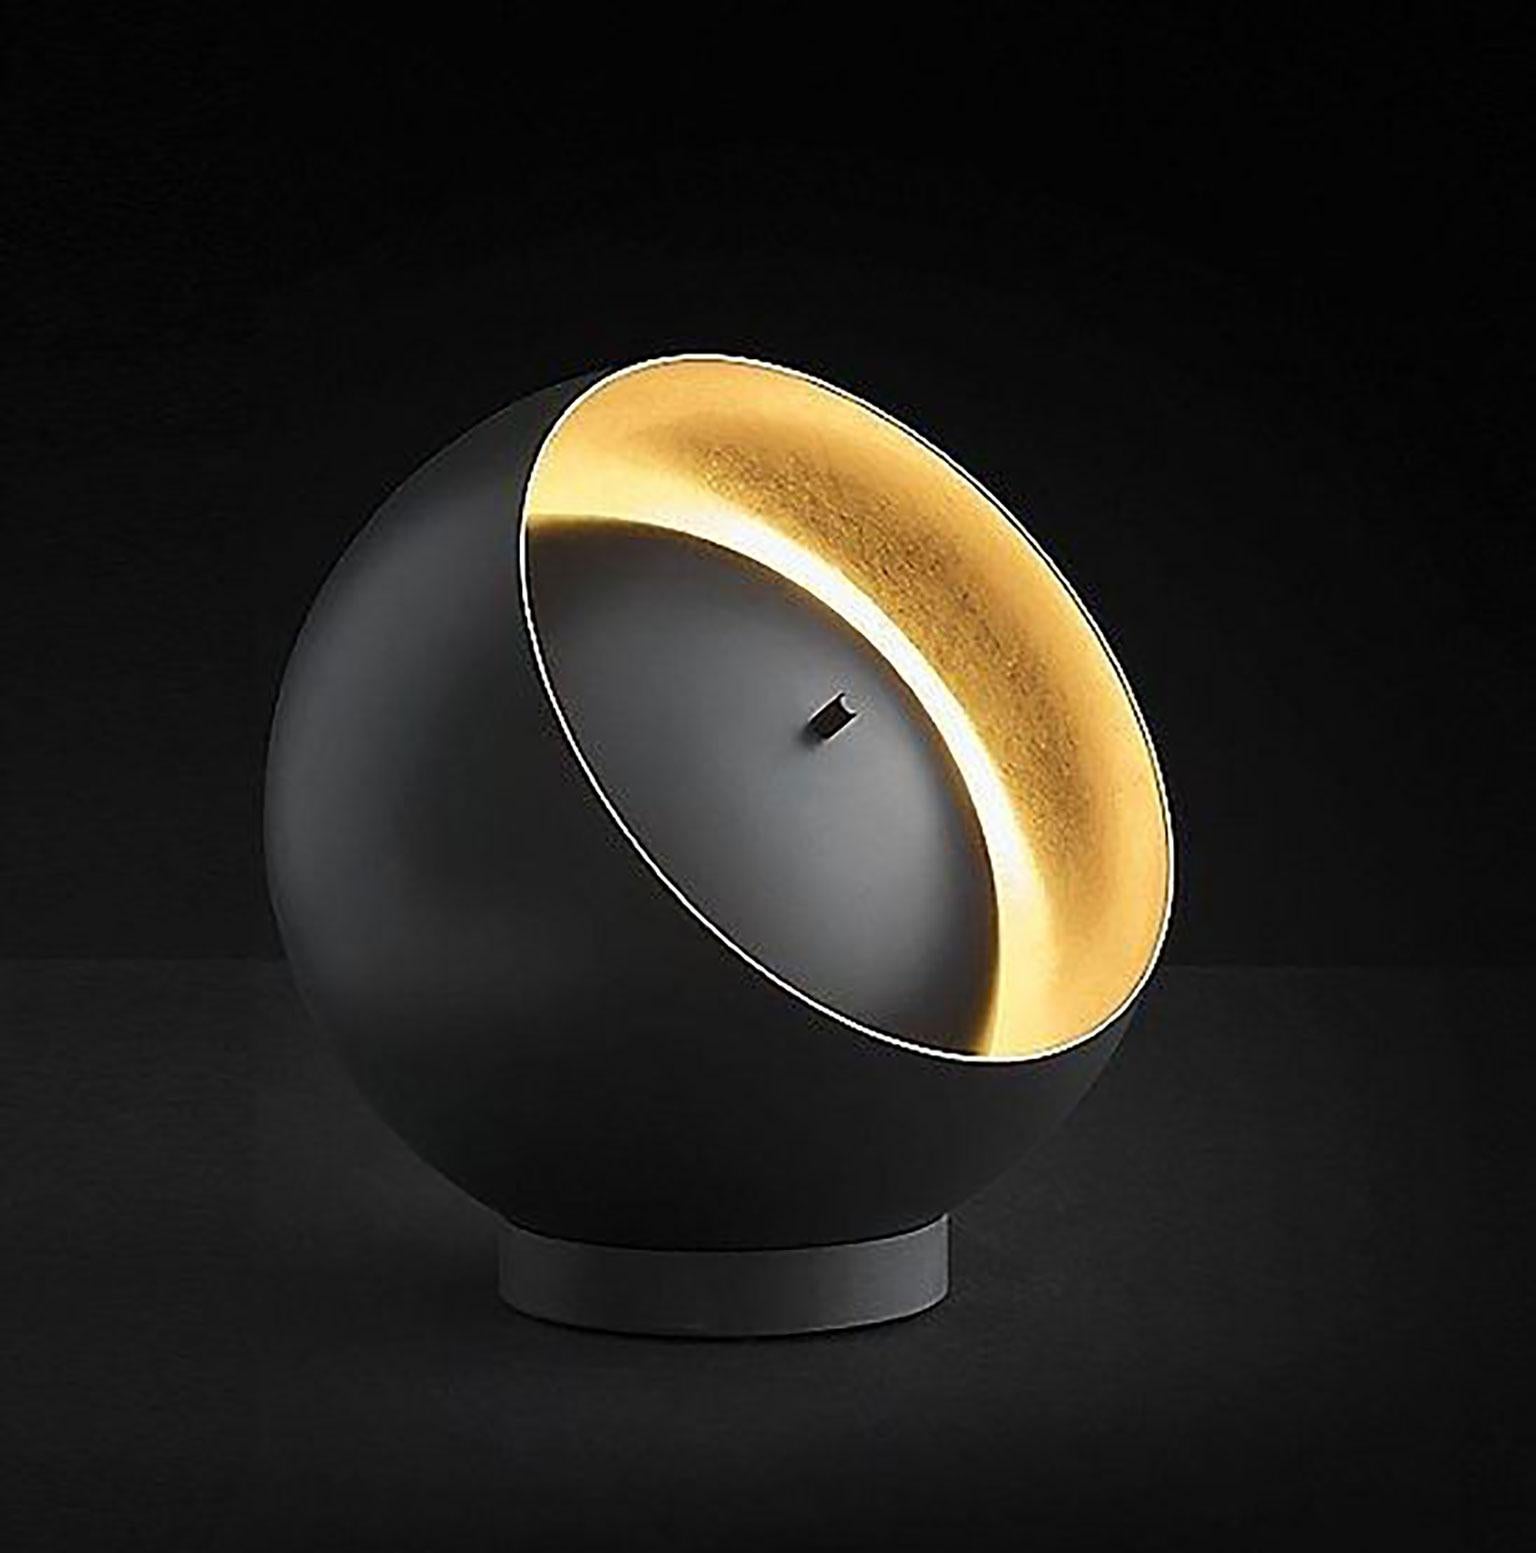 Eva table lamp designed by Francesca Borelli for Oluce. Francesca Borelli defined herself in the field of design. She has the ability for furniture and lighting design that is both passionate and conceptual. The black body of this lamp is a sphere